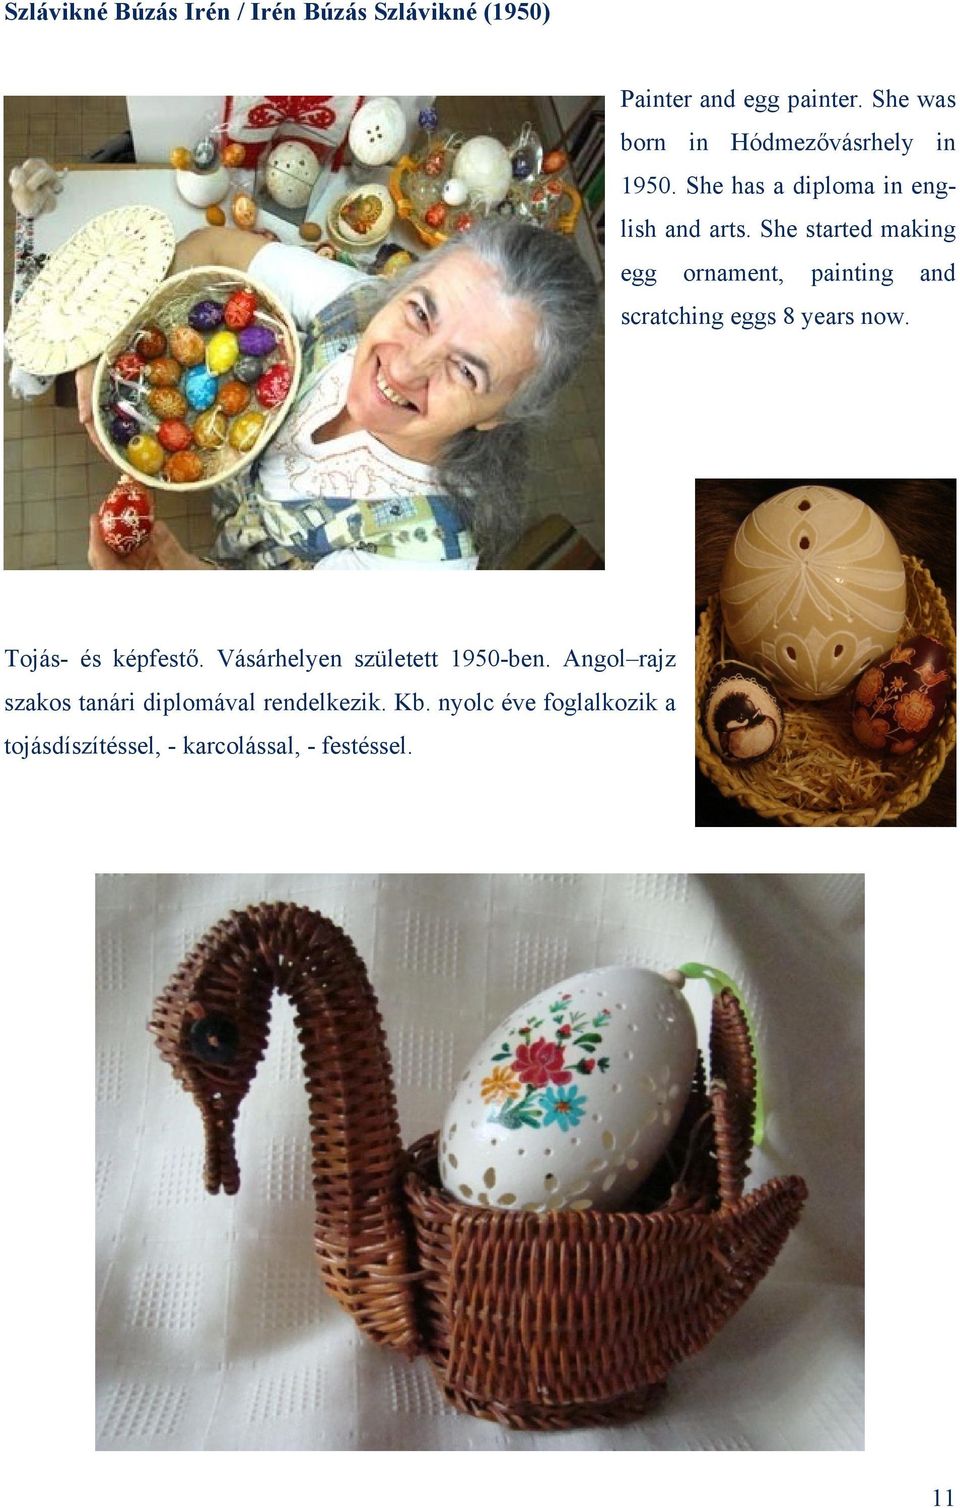 She started making egg ornament, painting and scratching eggs 8 years now. Tojás- és képfestő.